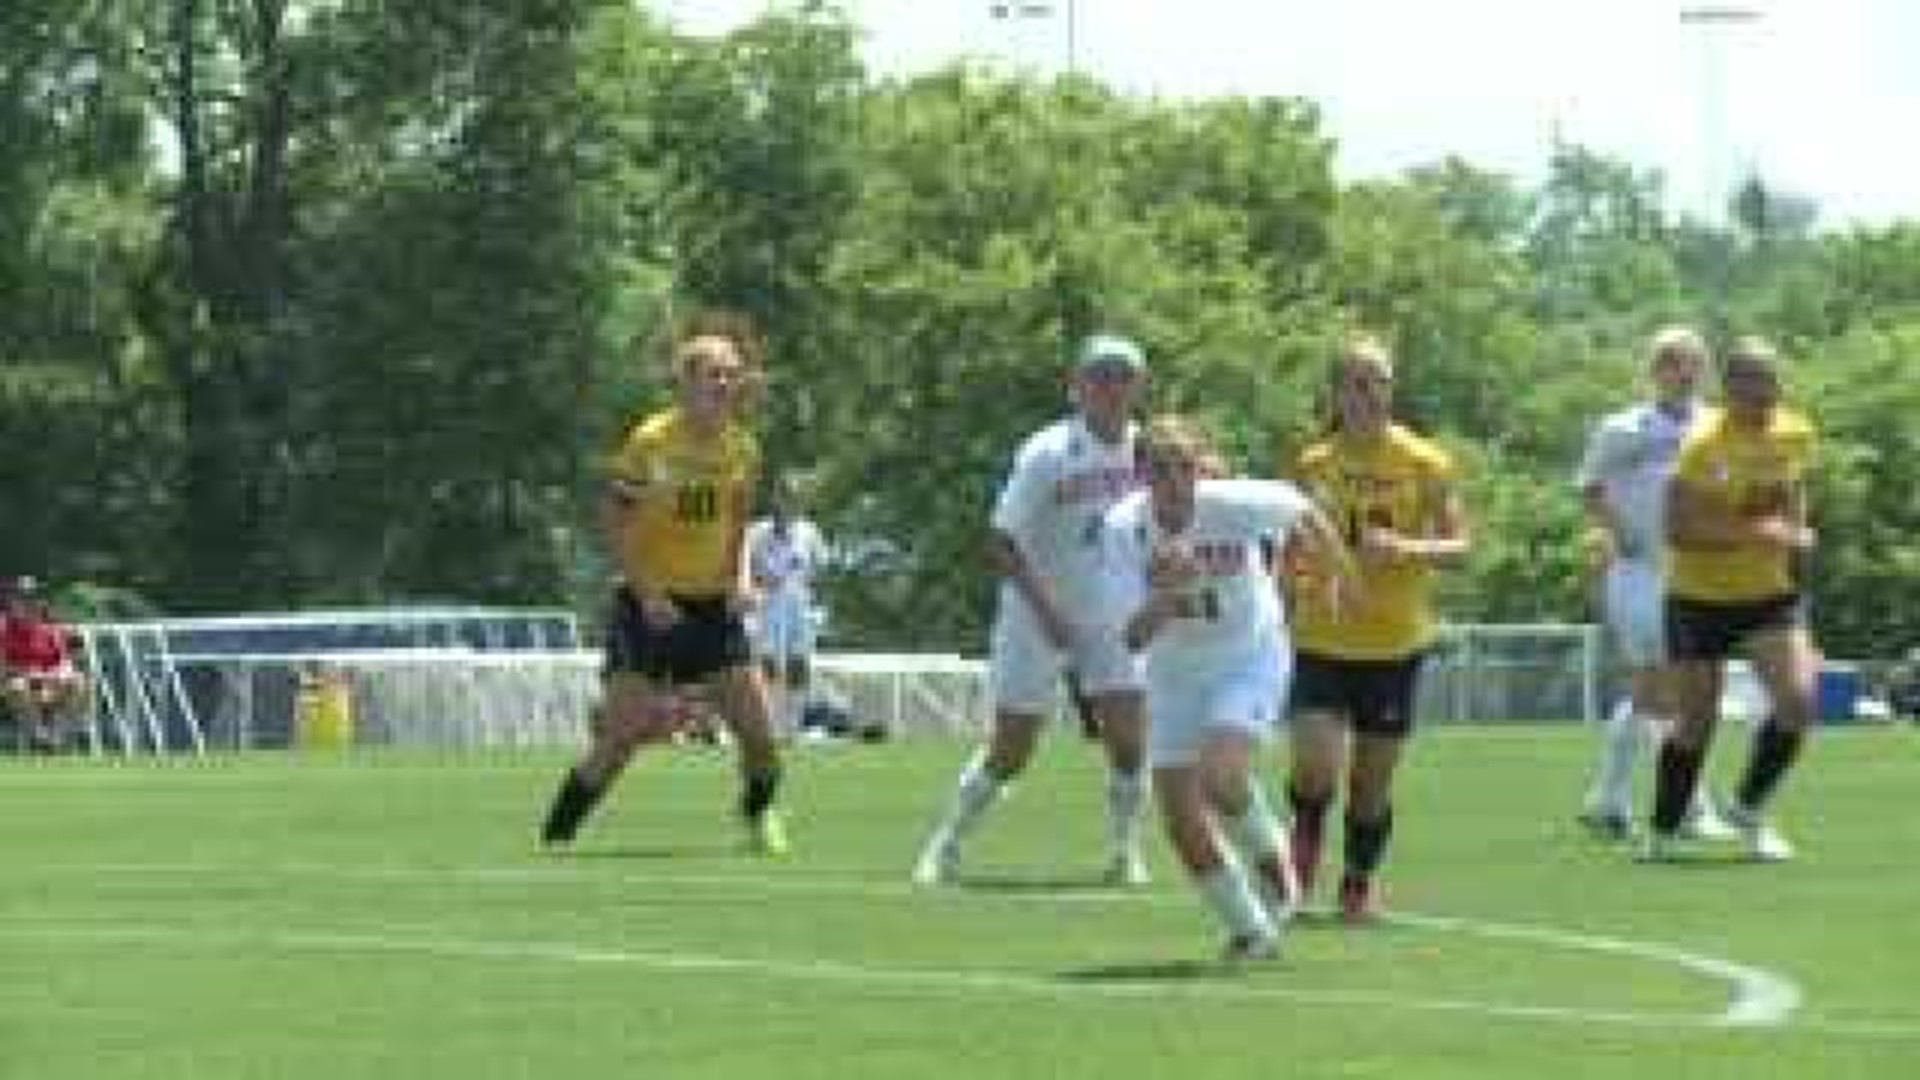 Girls soccer second highest for concussions